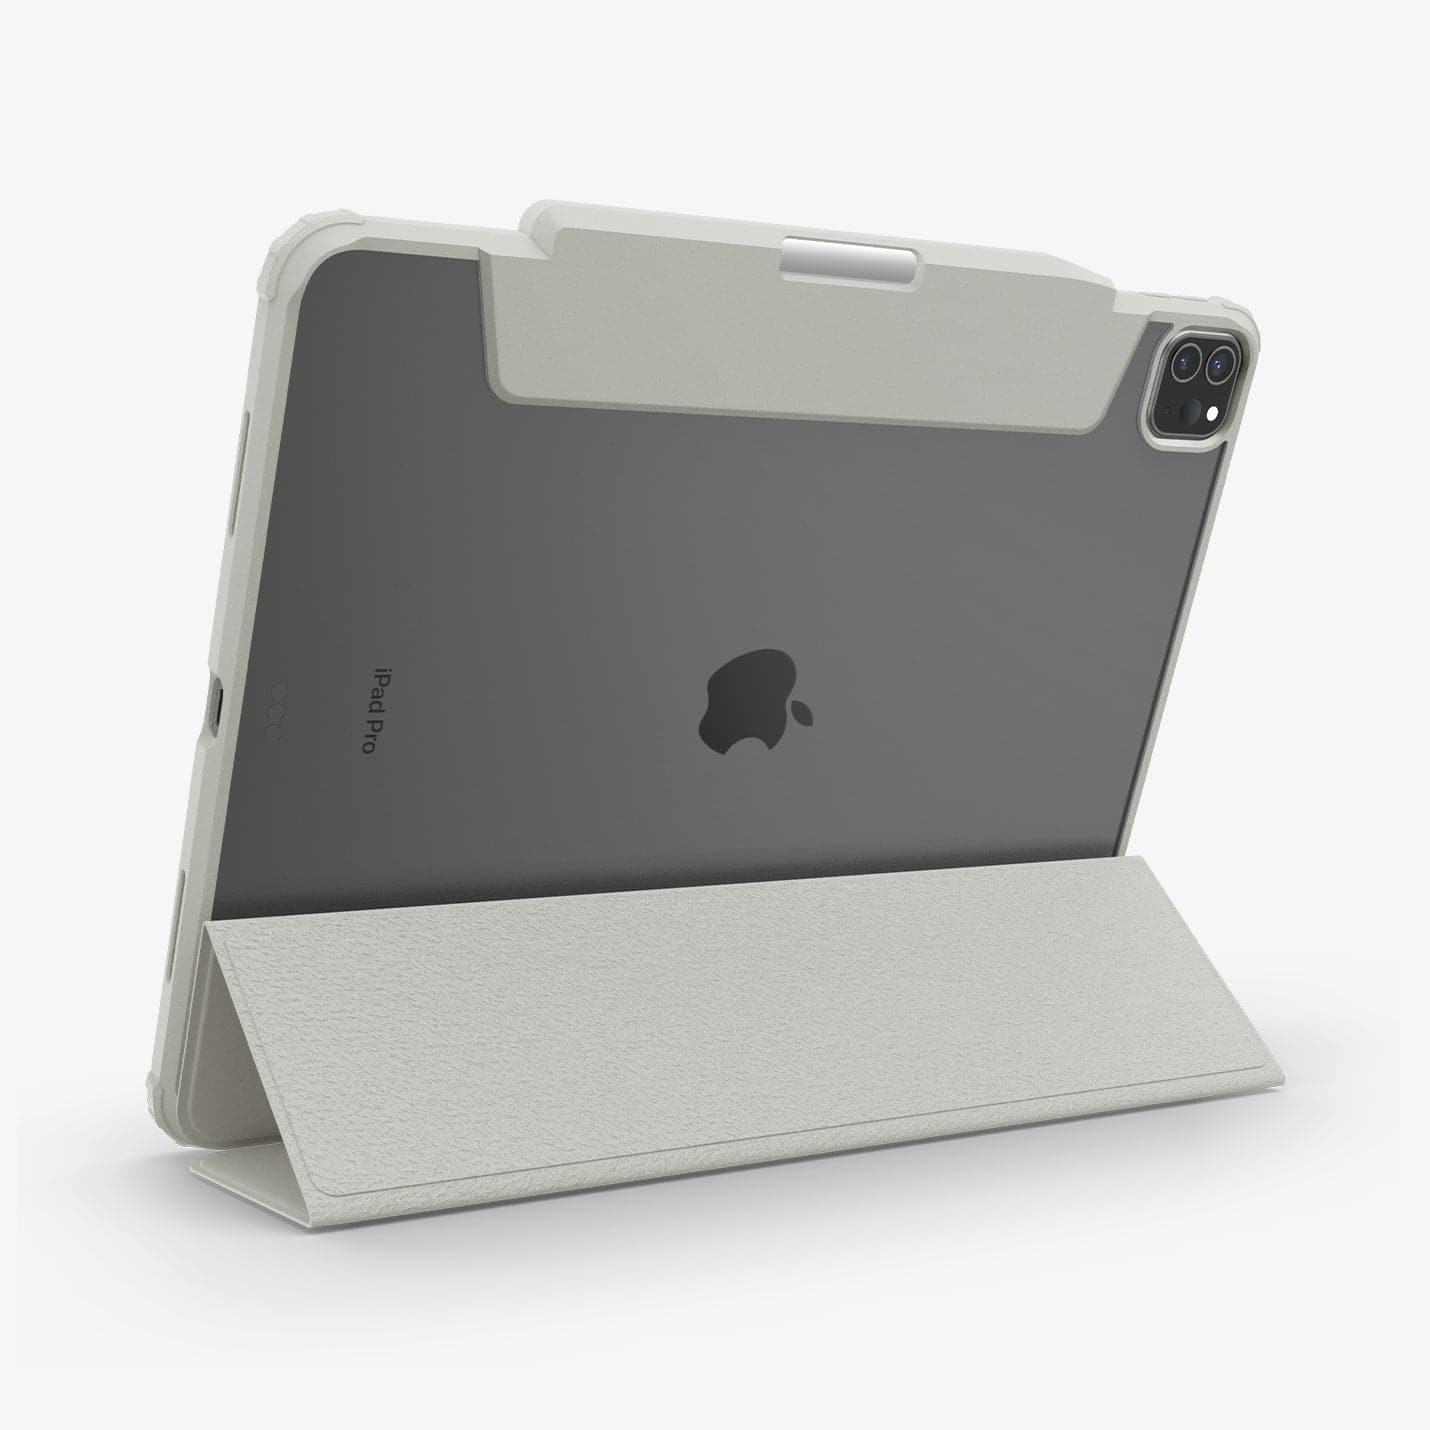  ACS06076 - iPad Pro 12.9" Case Air Skin Pro in gray showing the back with device propped up by built in kickstand